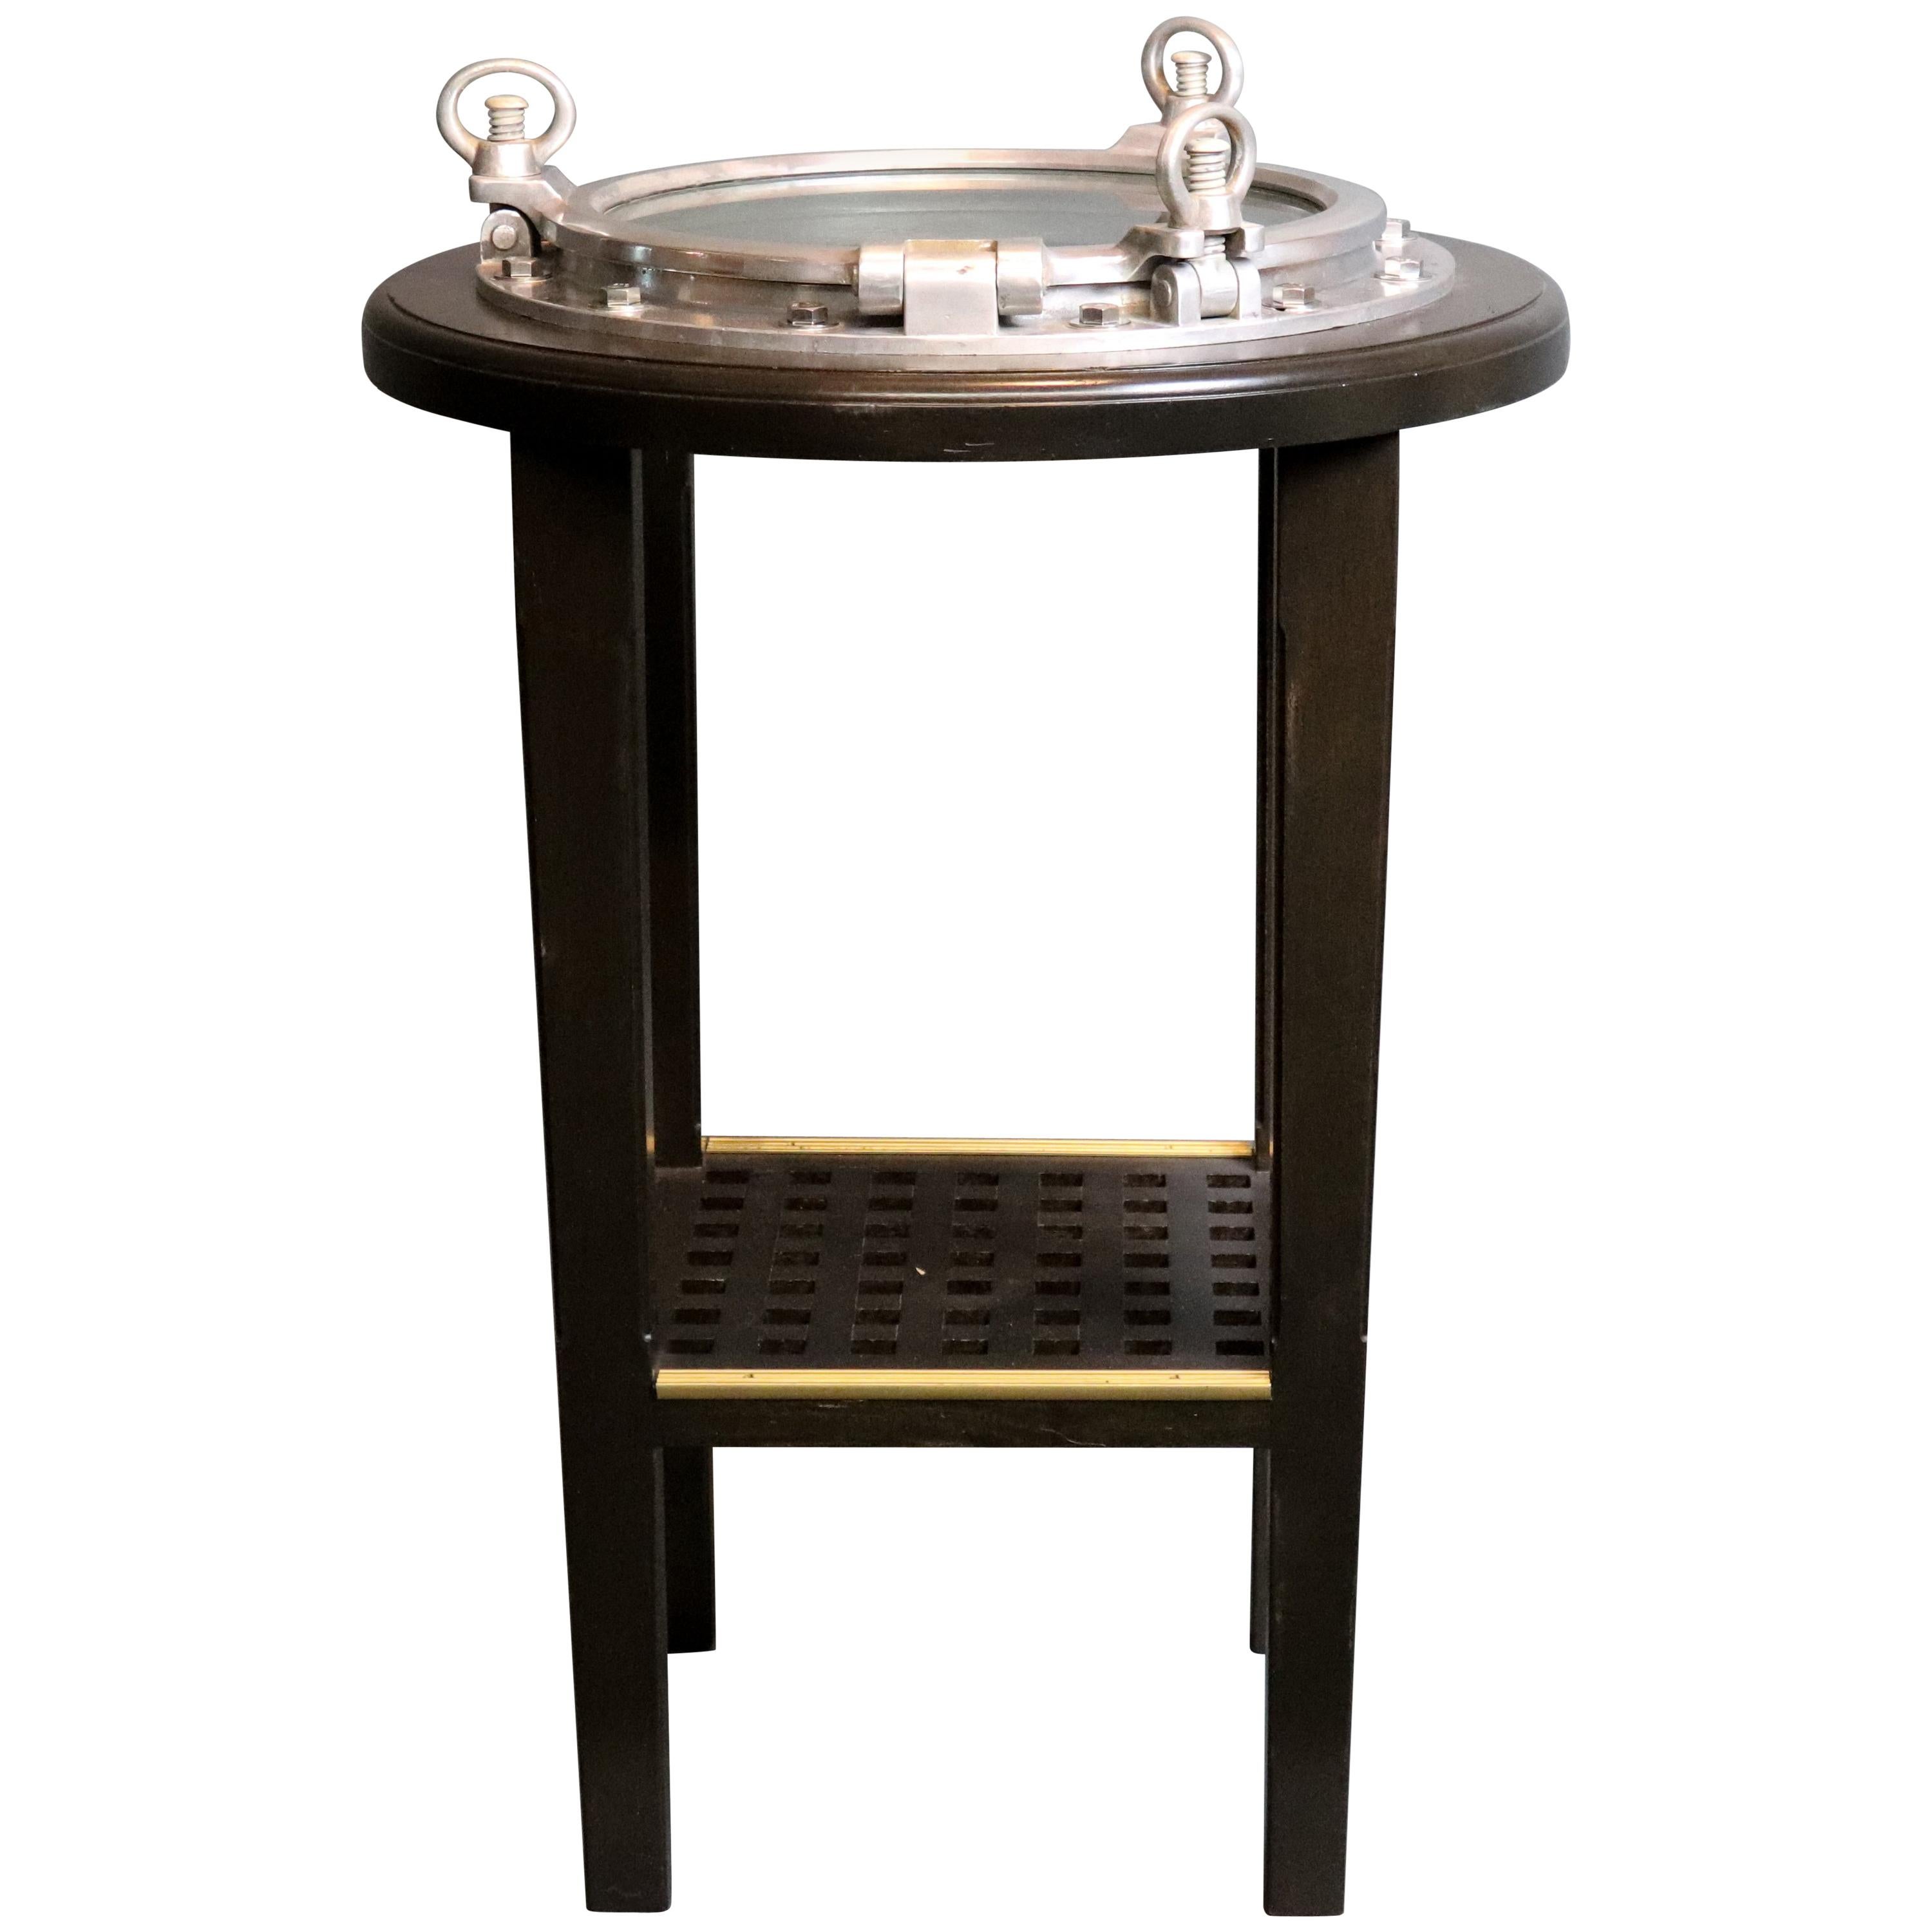 Authentic Porthole Table Bistro Height For Sale